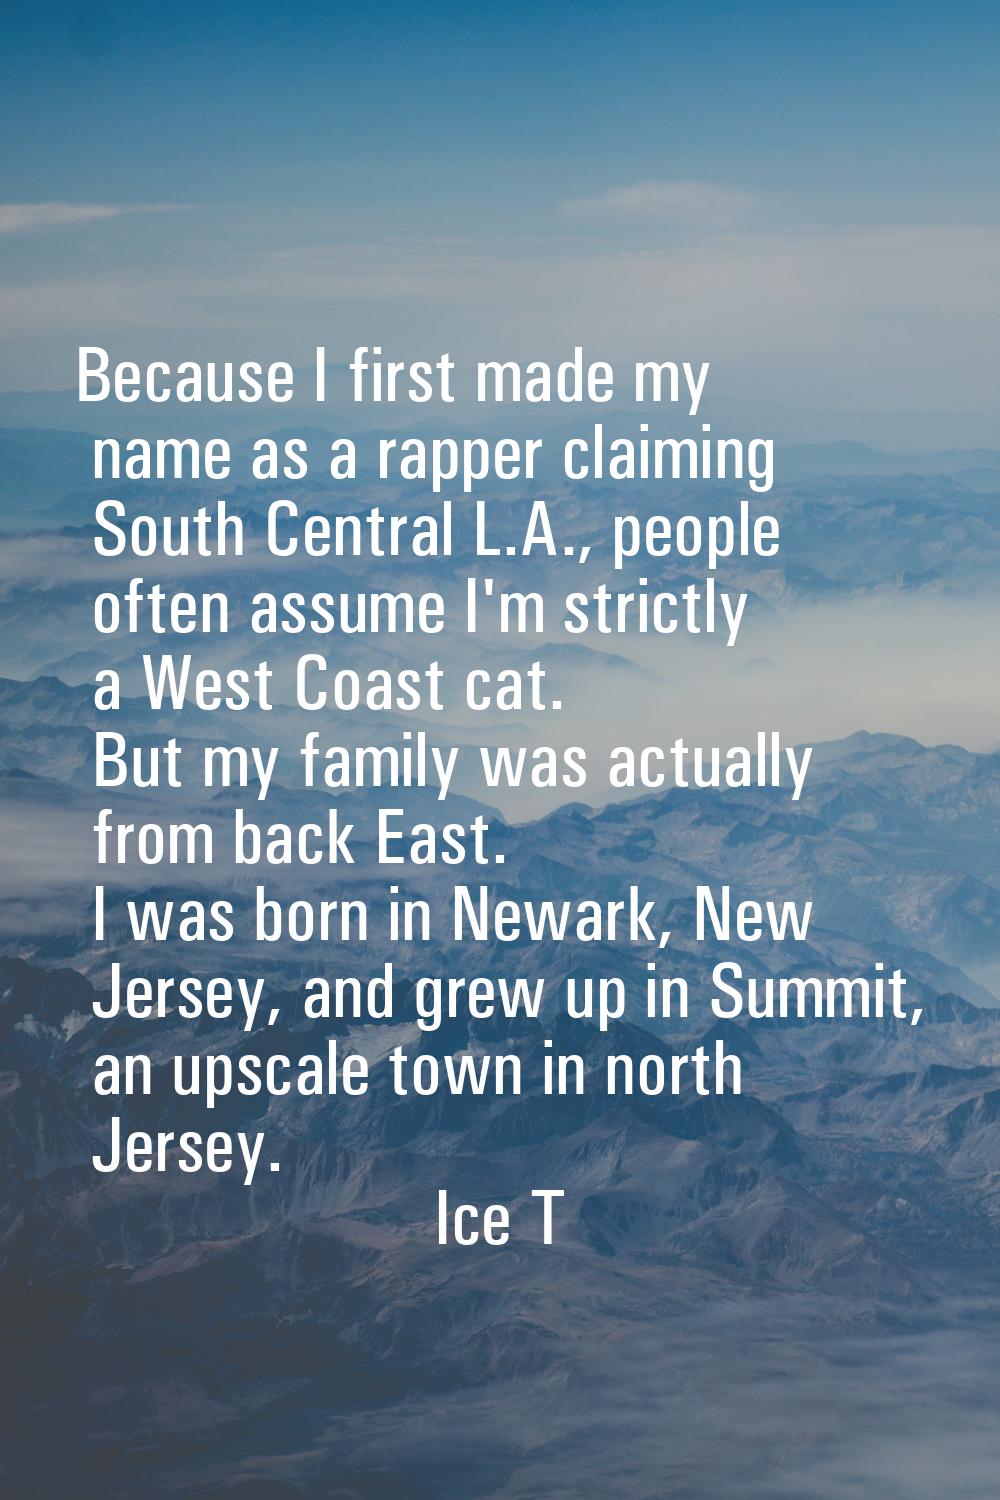 Because I first made my name as a rapper claiming South Central L.A., people often assume I'm stric